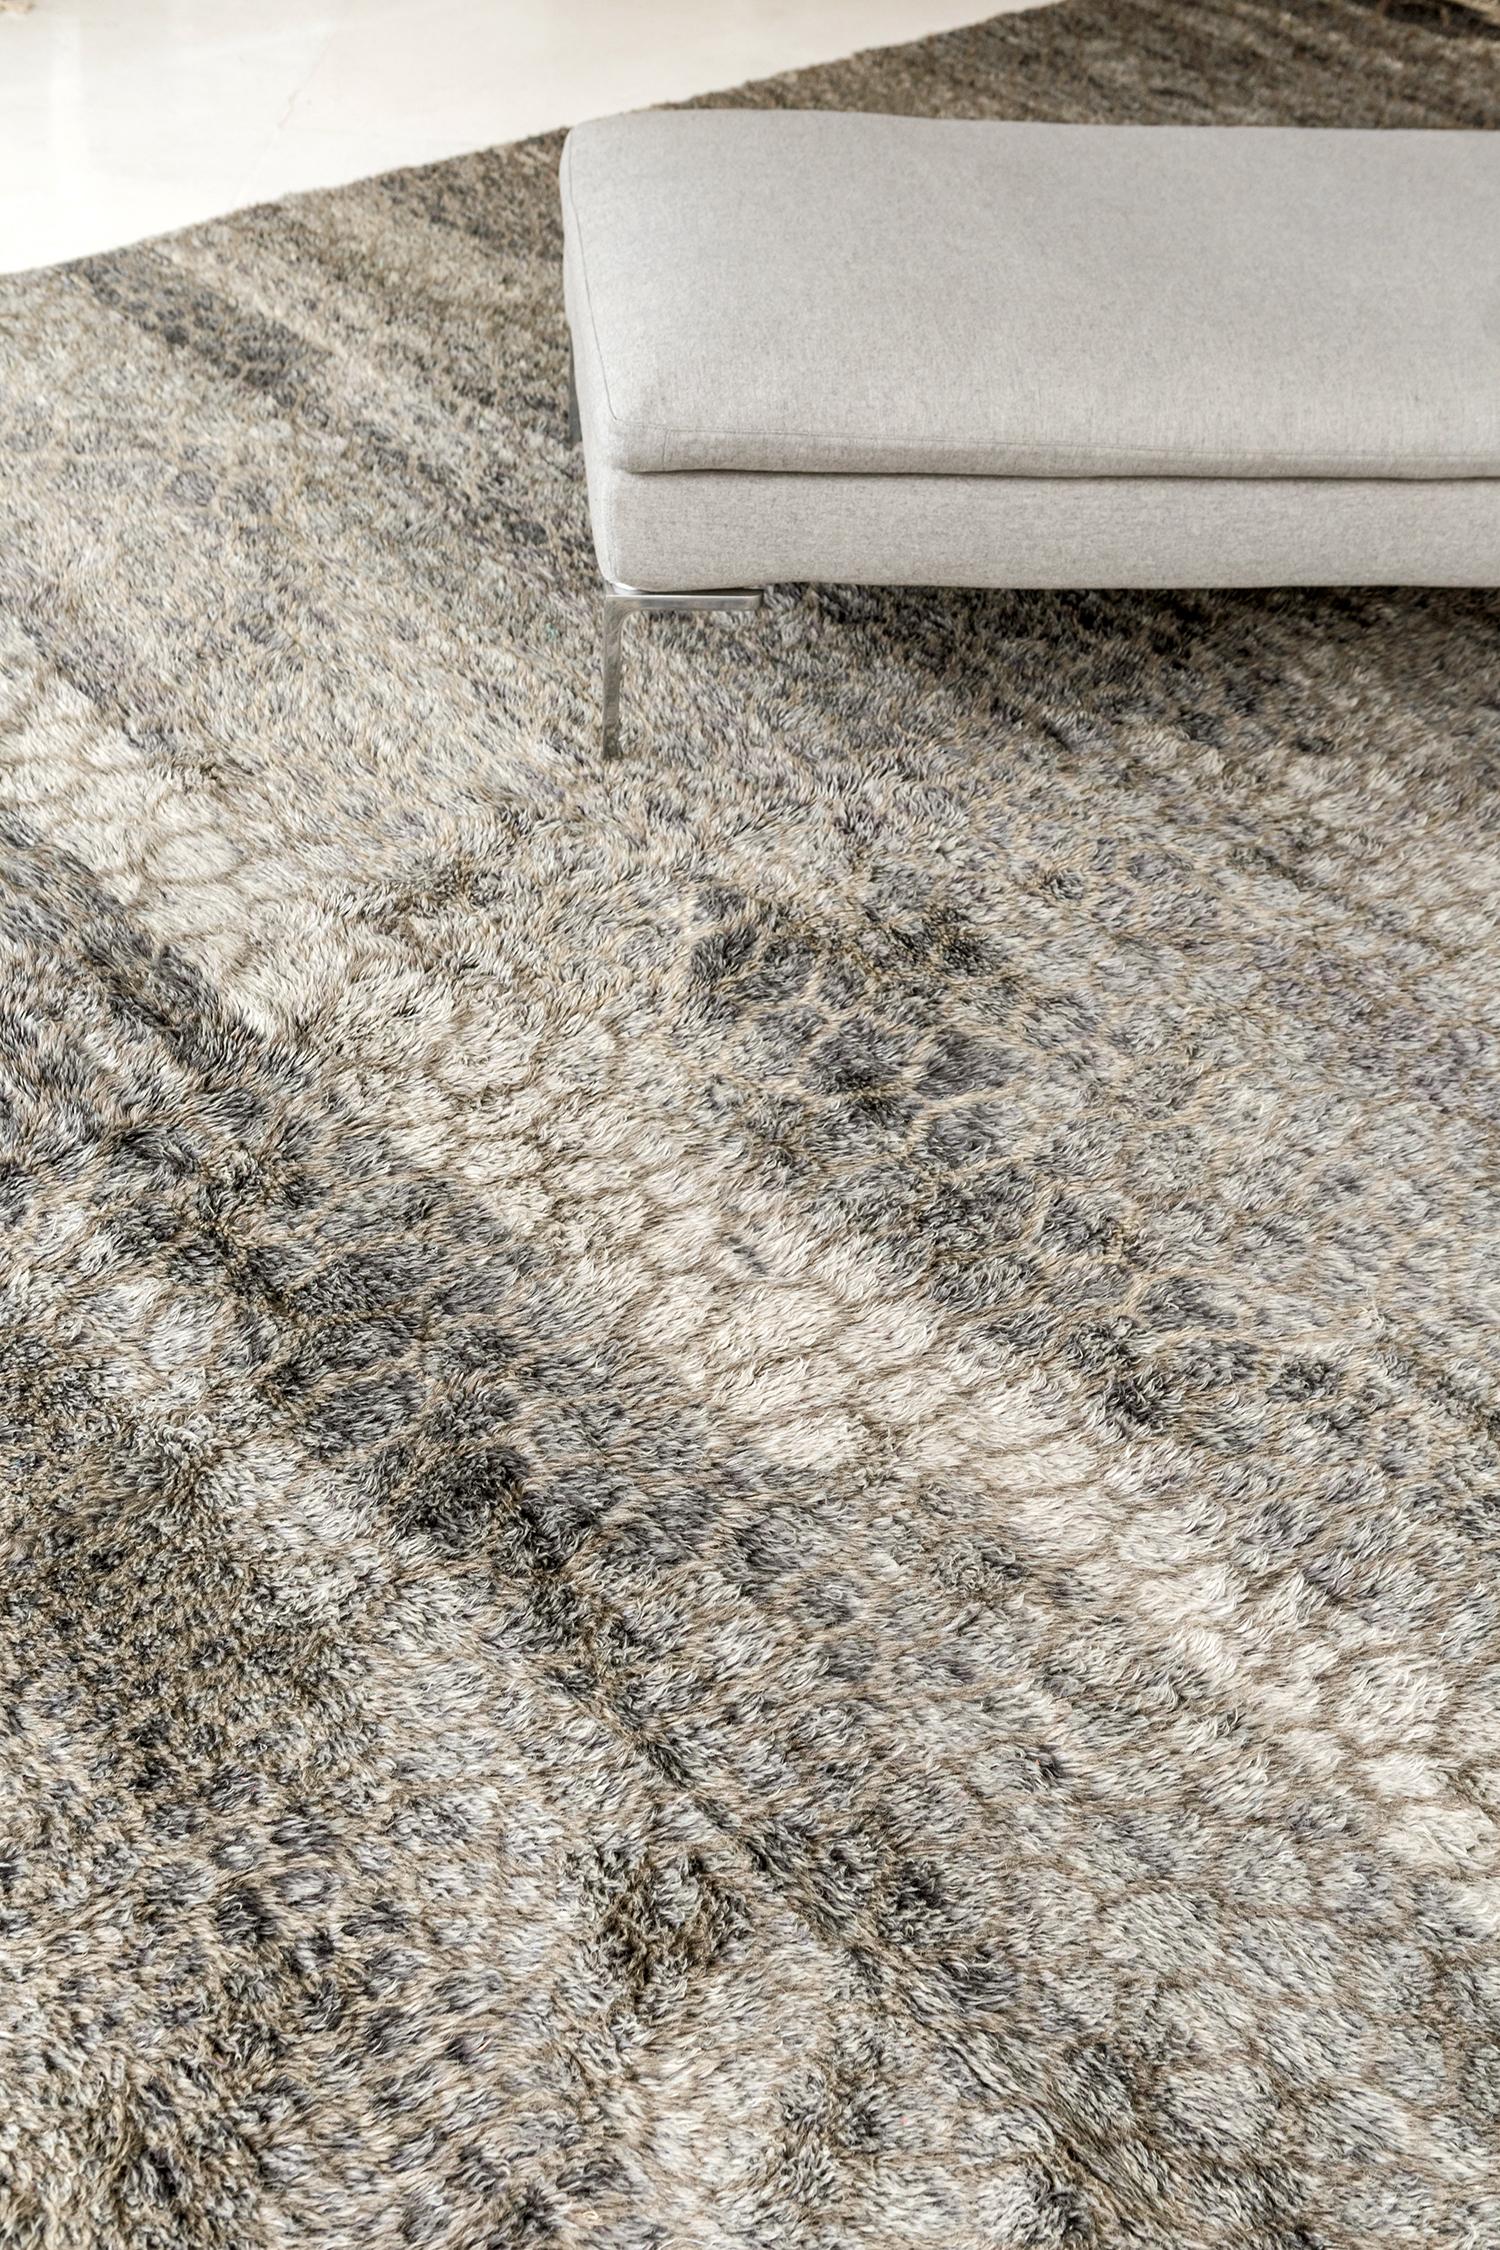 A magnificent Moroccan Berber rug in Middle Atlas Tribe that displays a minimalist style reminiscent of a crocodile skin. This fascinating plush rug emanates chic yet sophisticated vibe. The thin lines crisscross in an organic manner, creating a